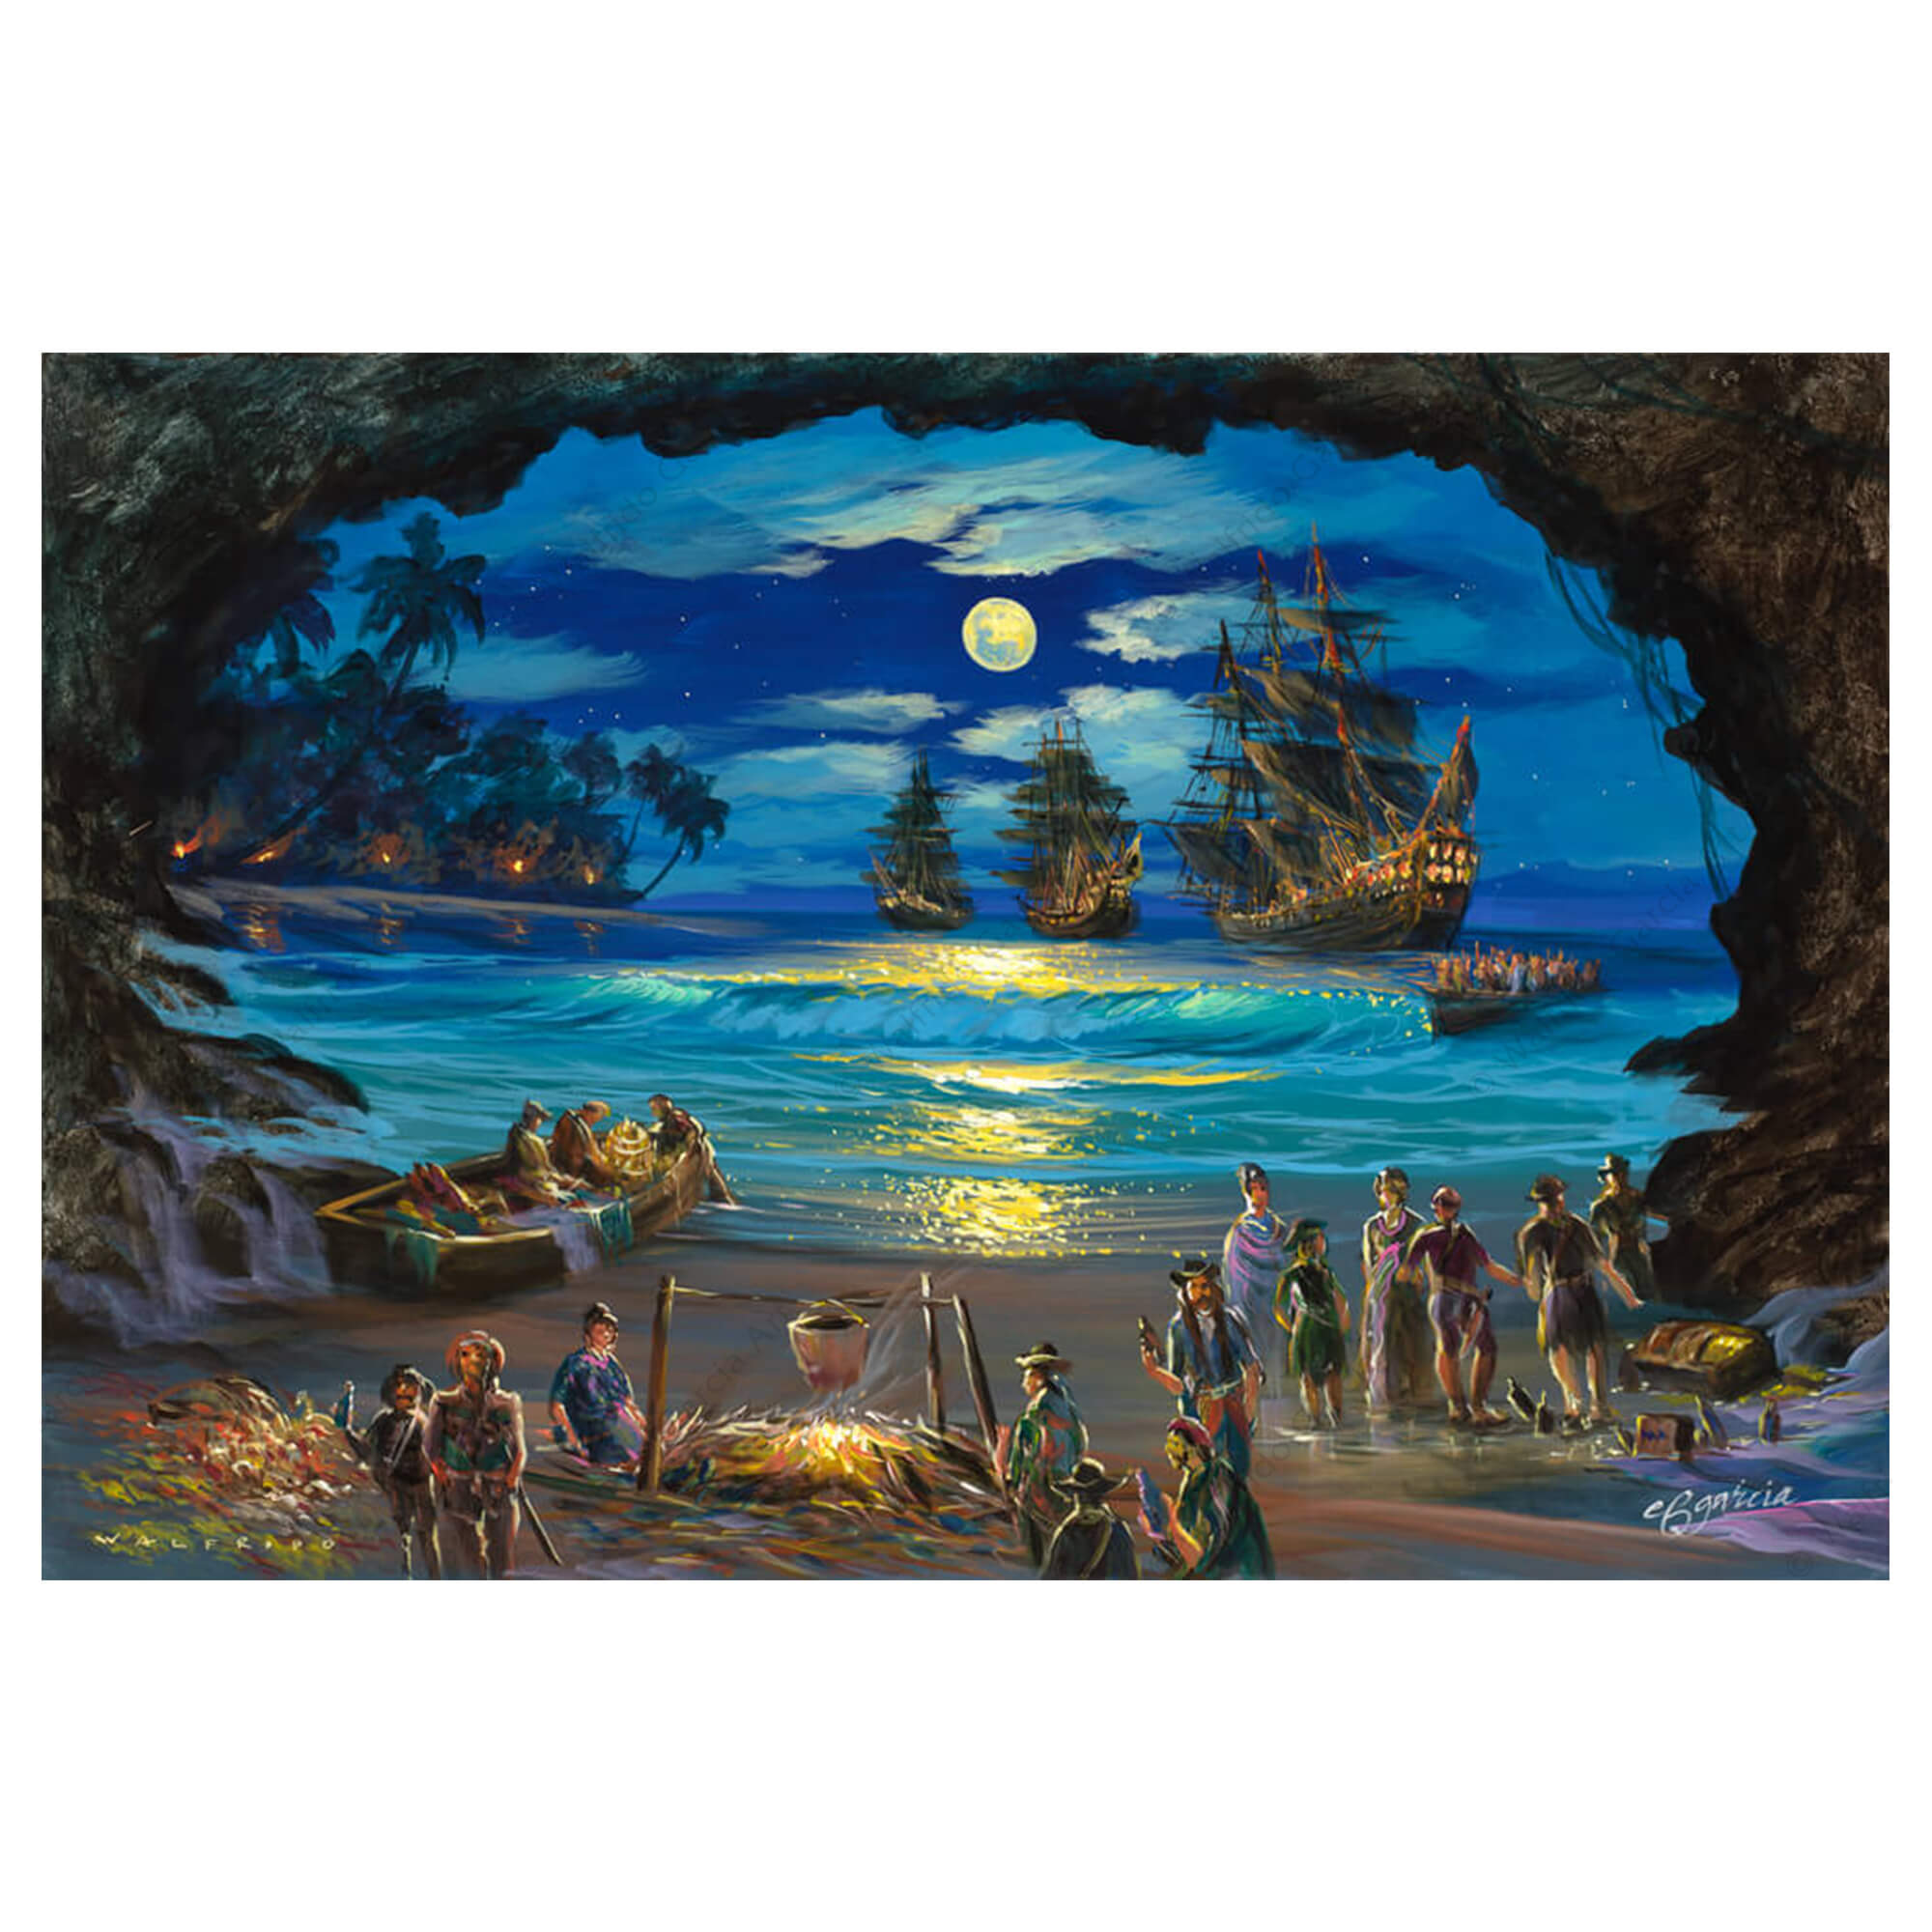 A matted art print featuring a cave framing merchants and vintage ships coming to the shores of Hawaii at night by Hawaii artist Walfrido Garcia